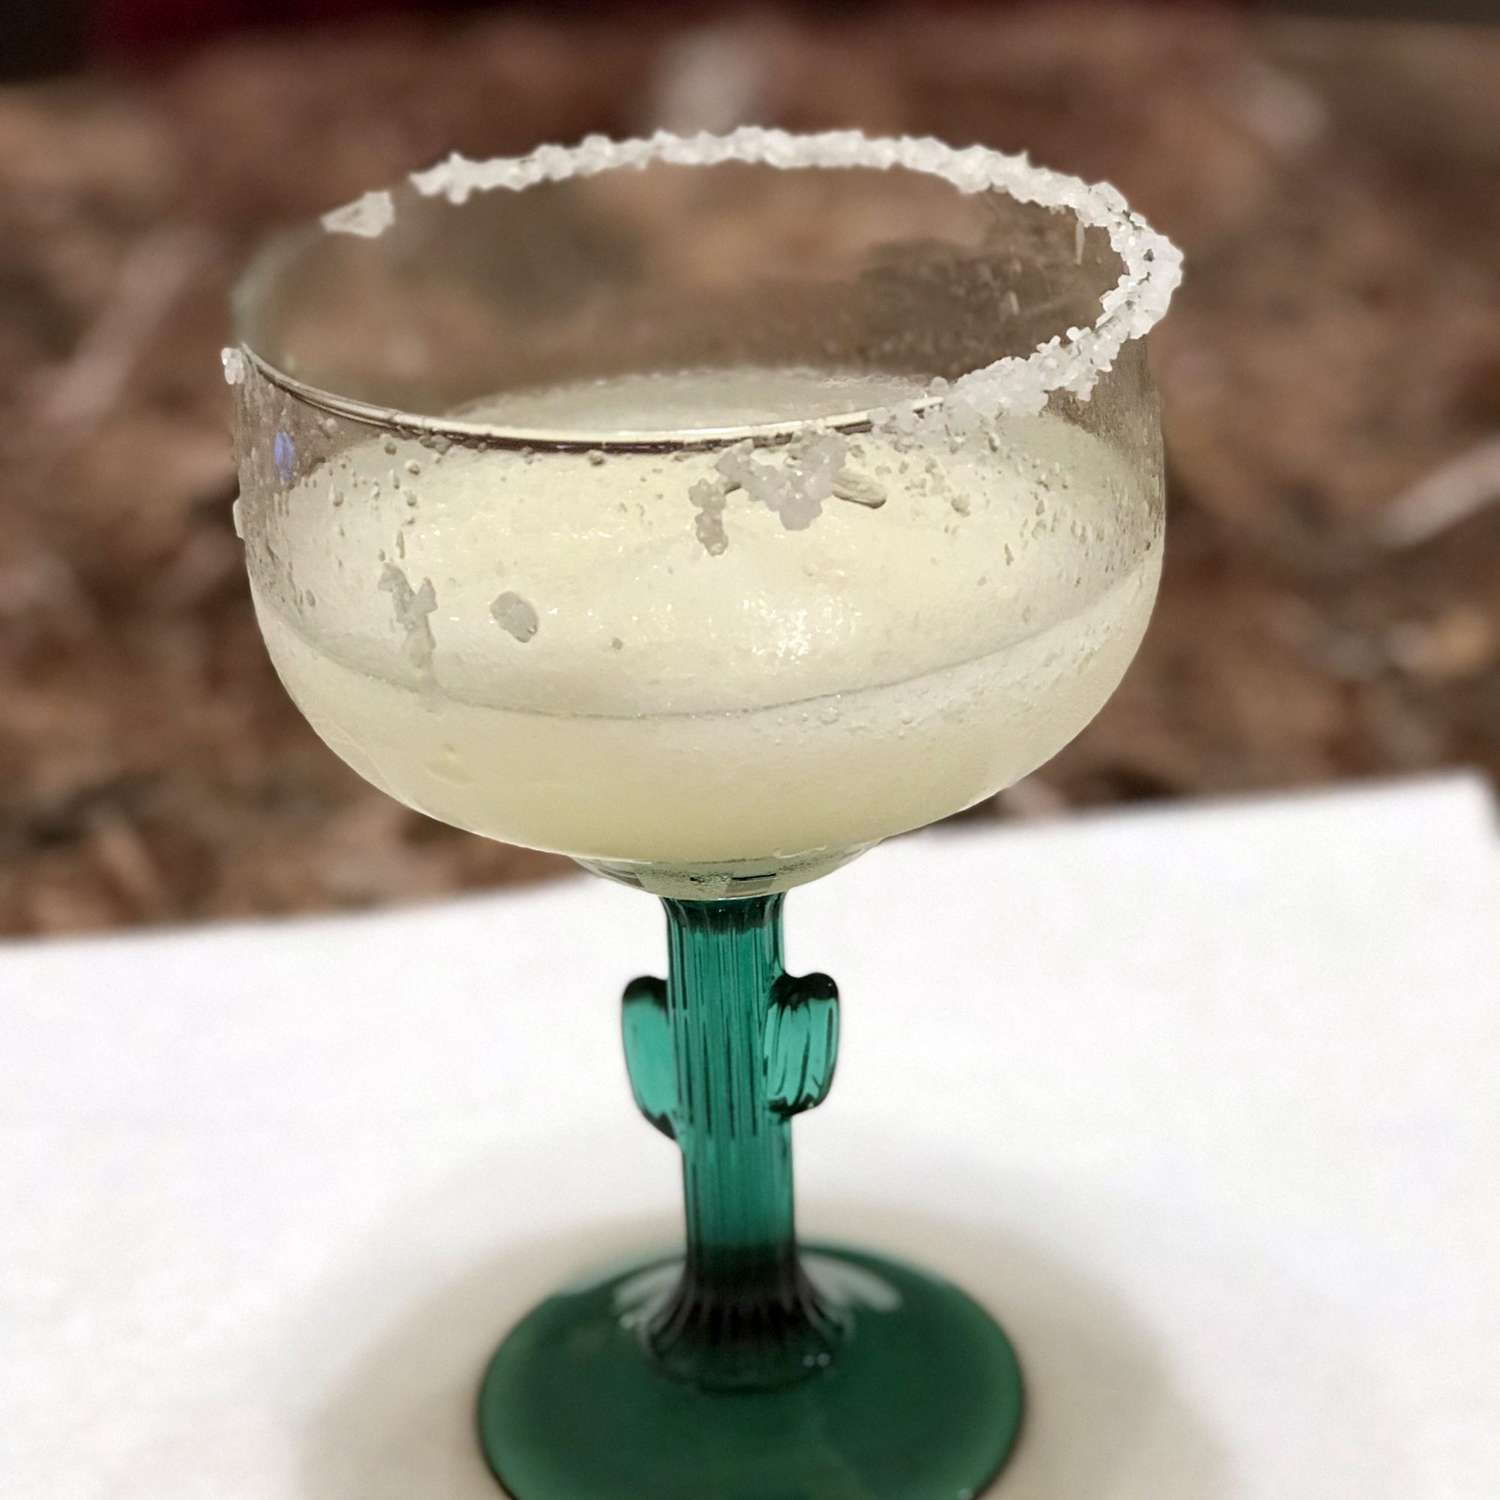 a margarita with a salted rim served in a fun cocktail glass with a saguaro cactus as the stem